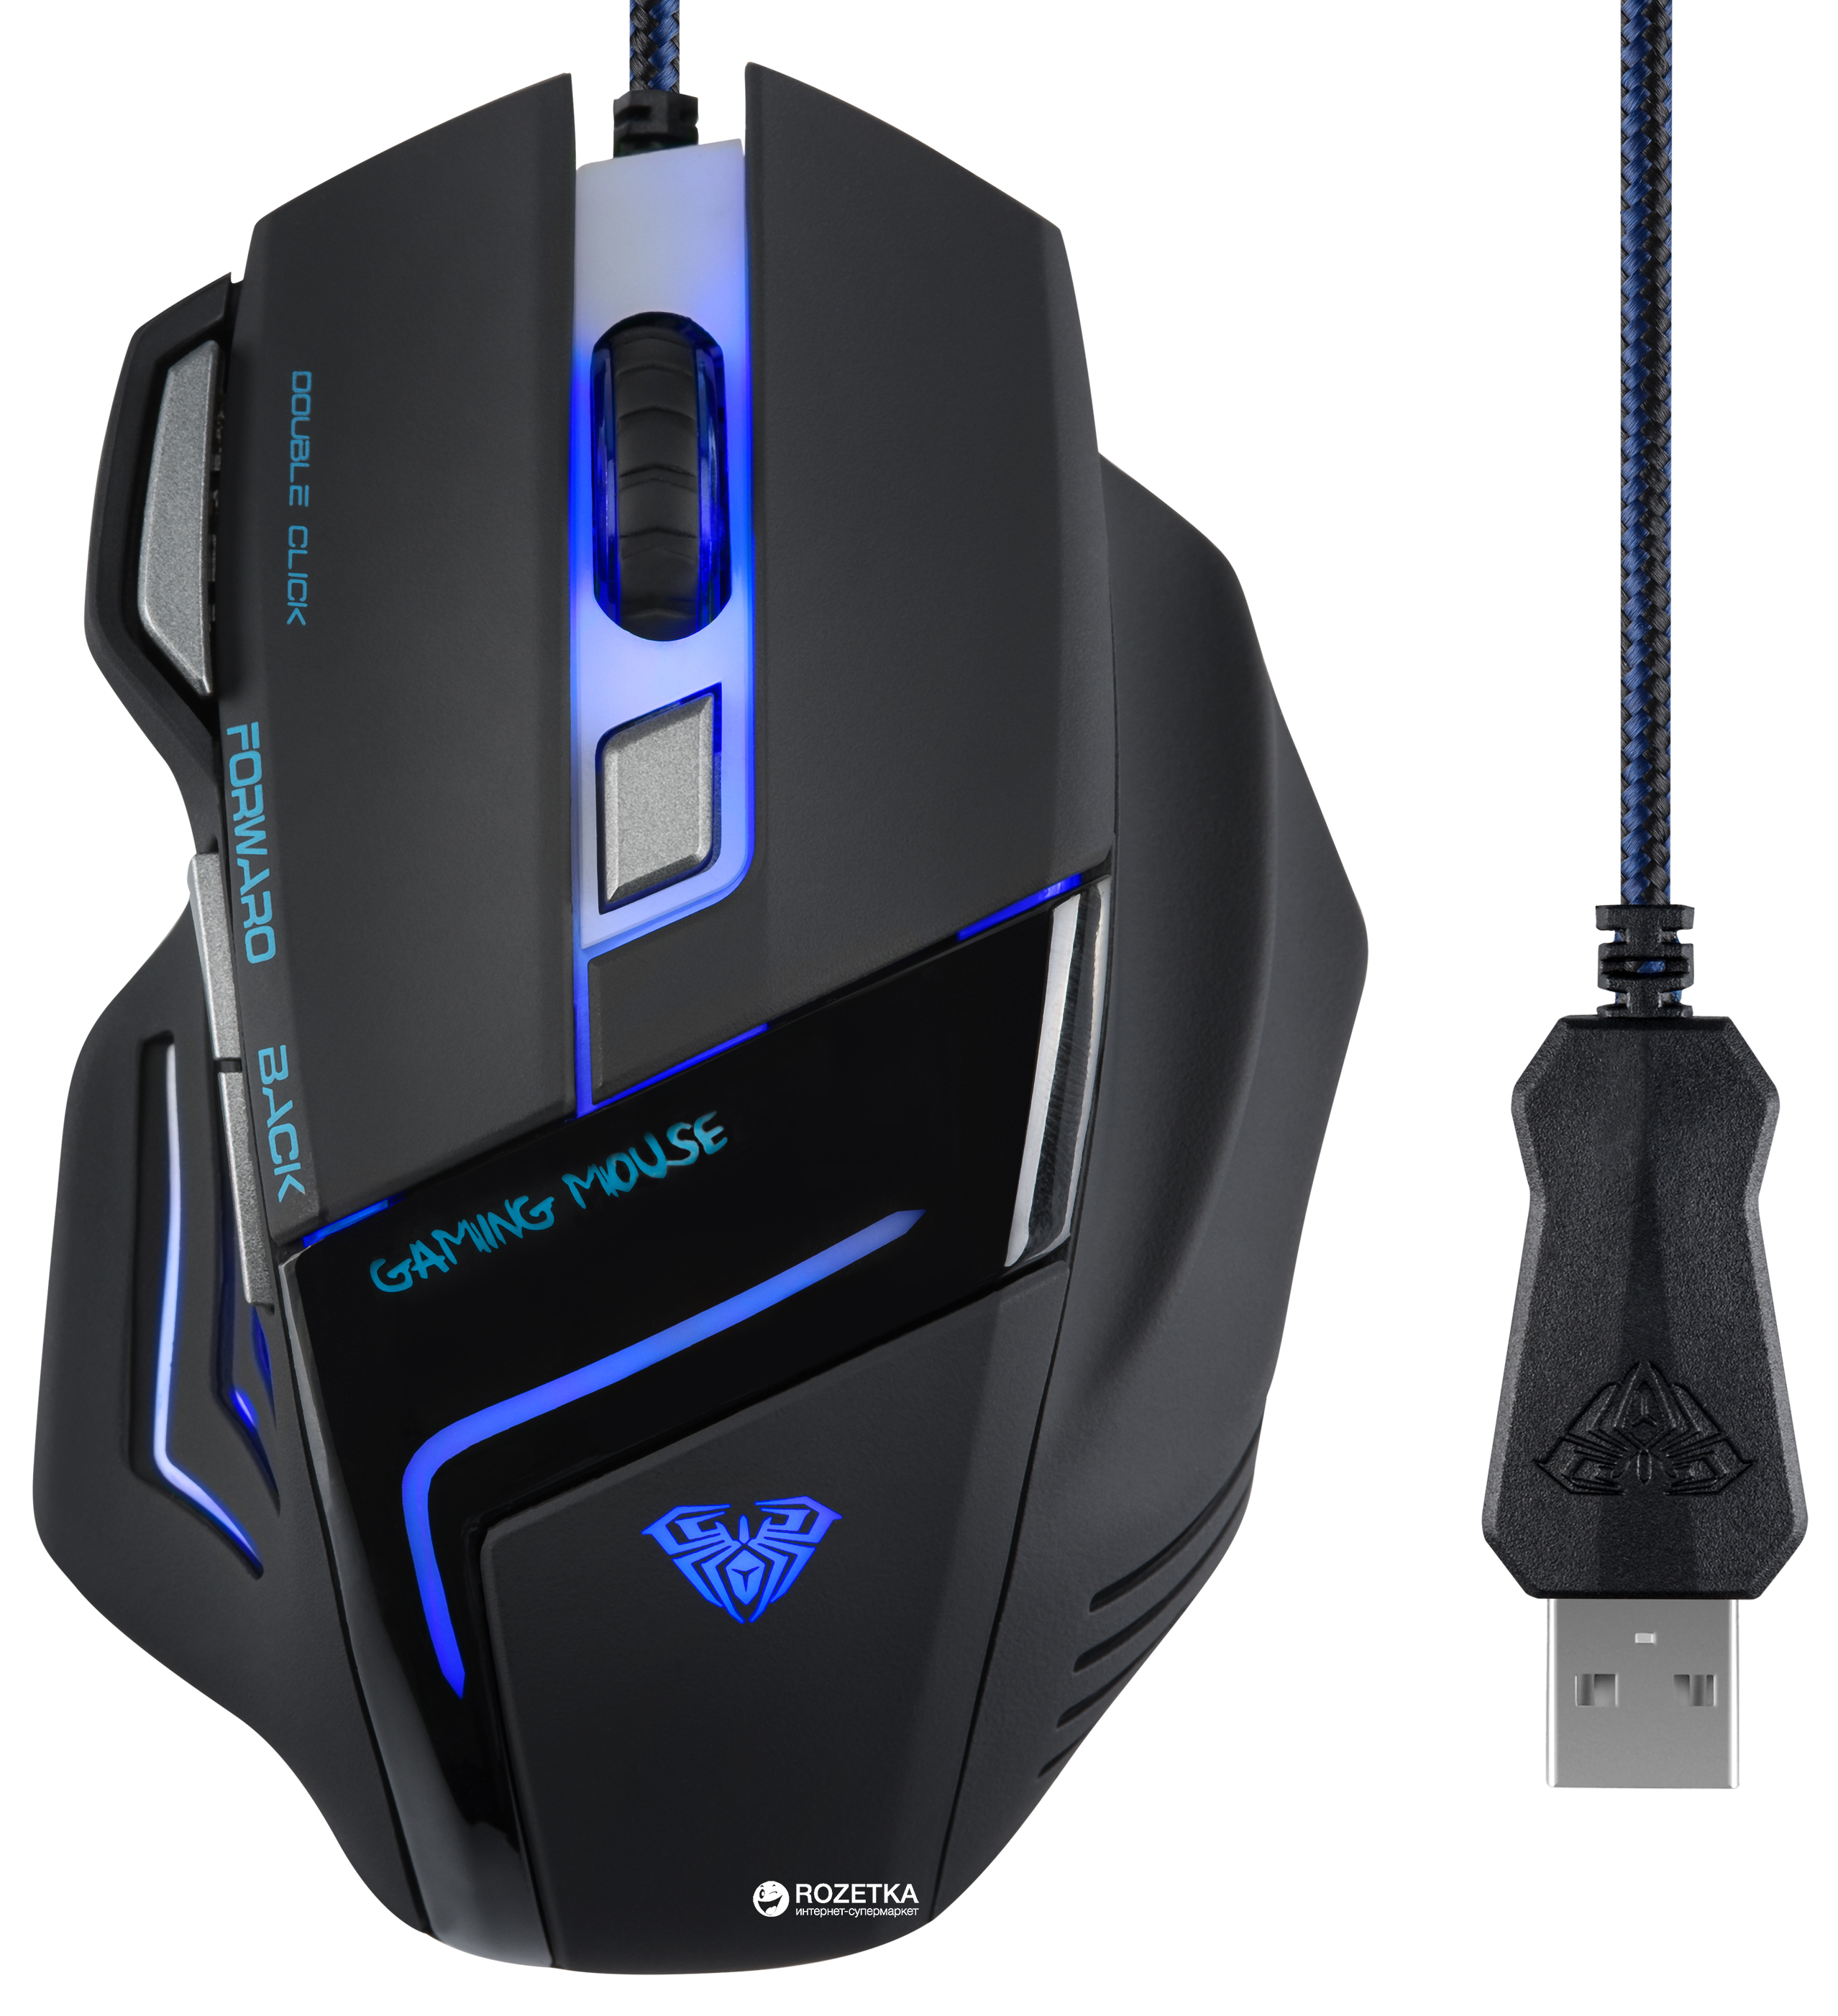 aula ghost shark gaming mouse software